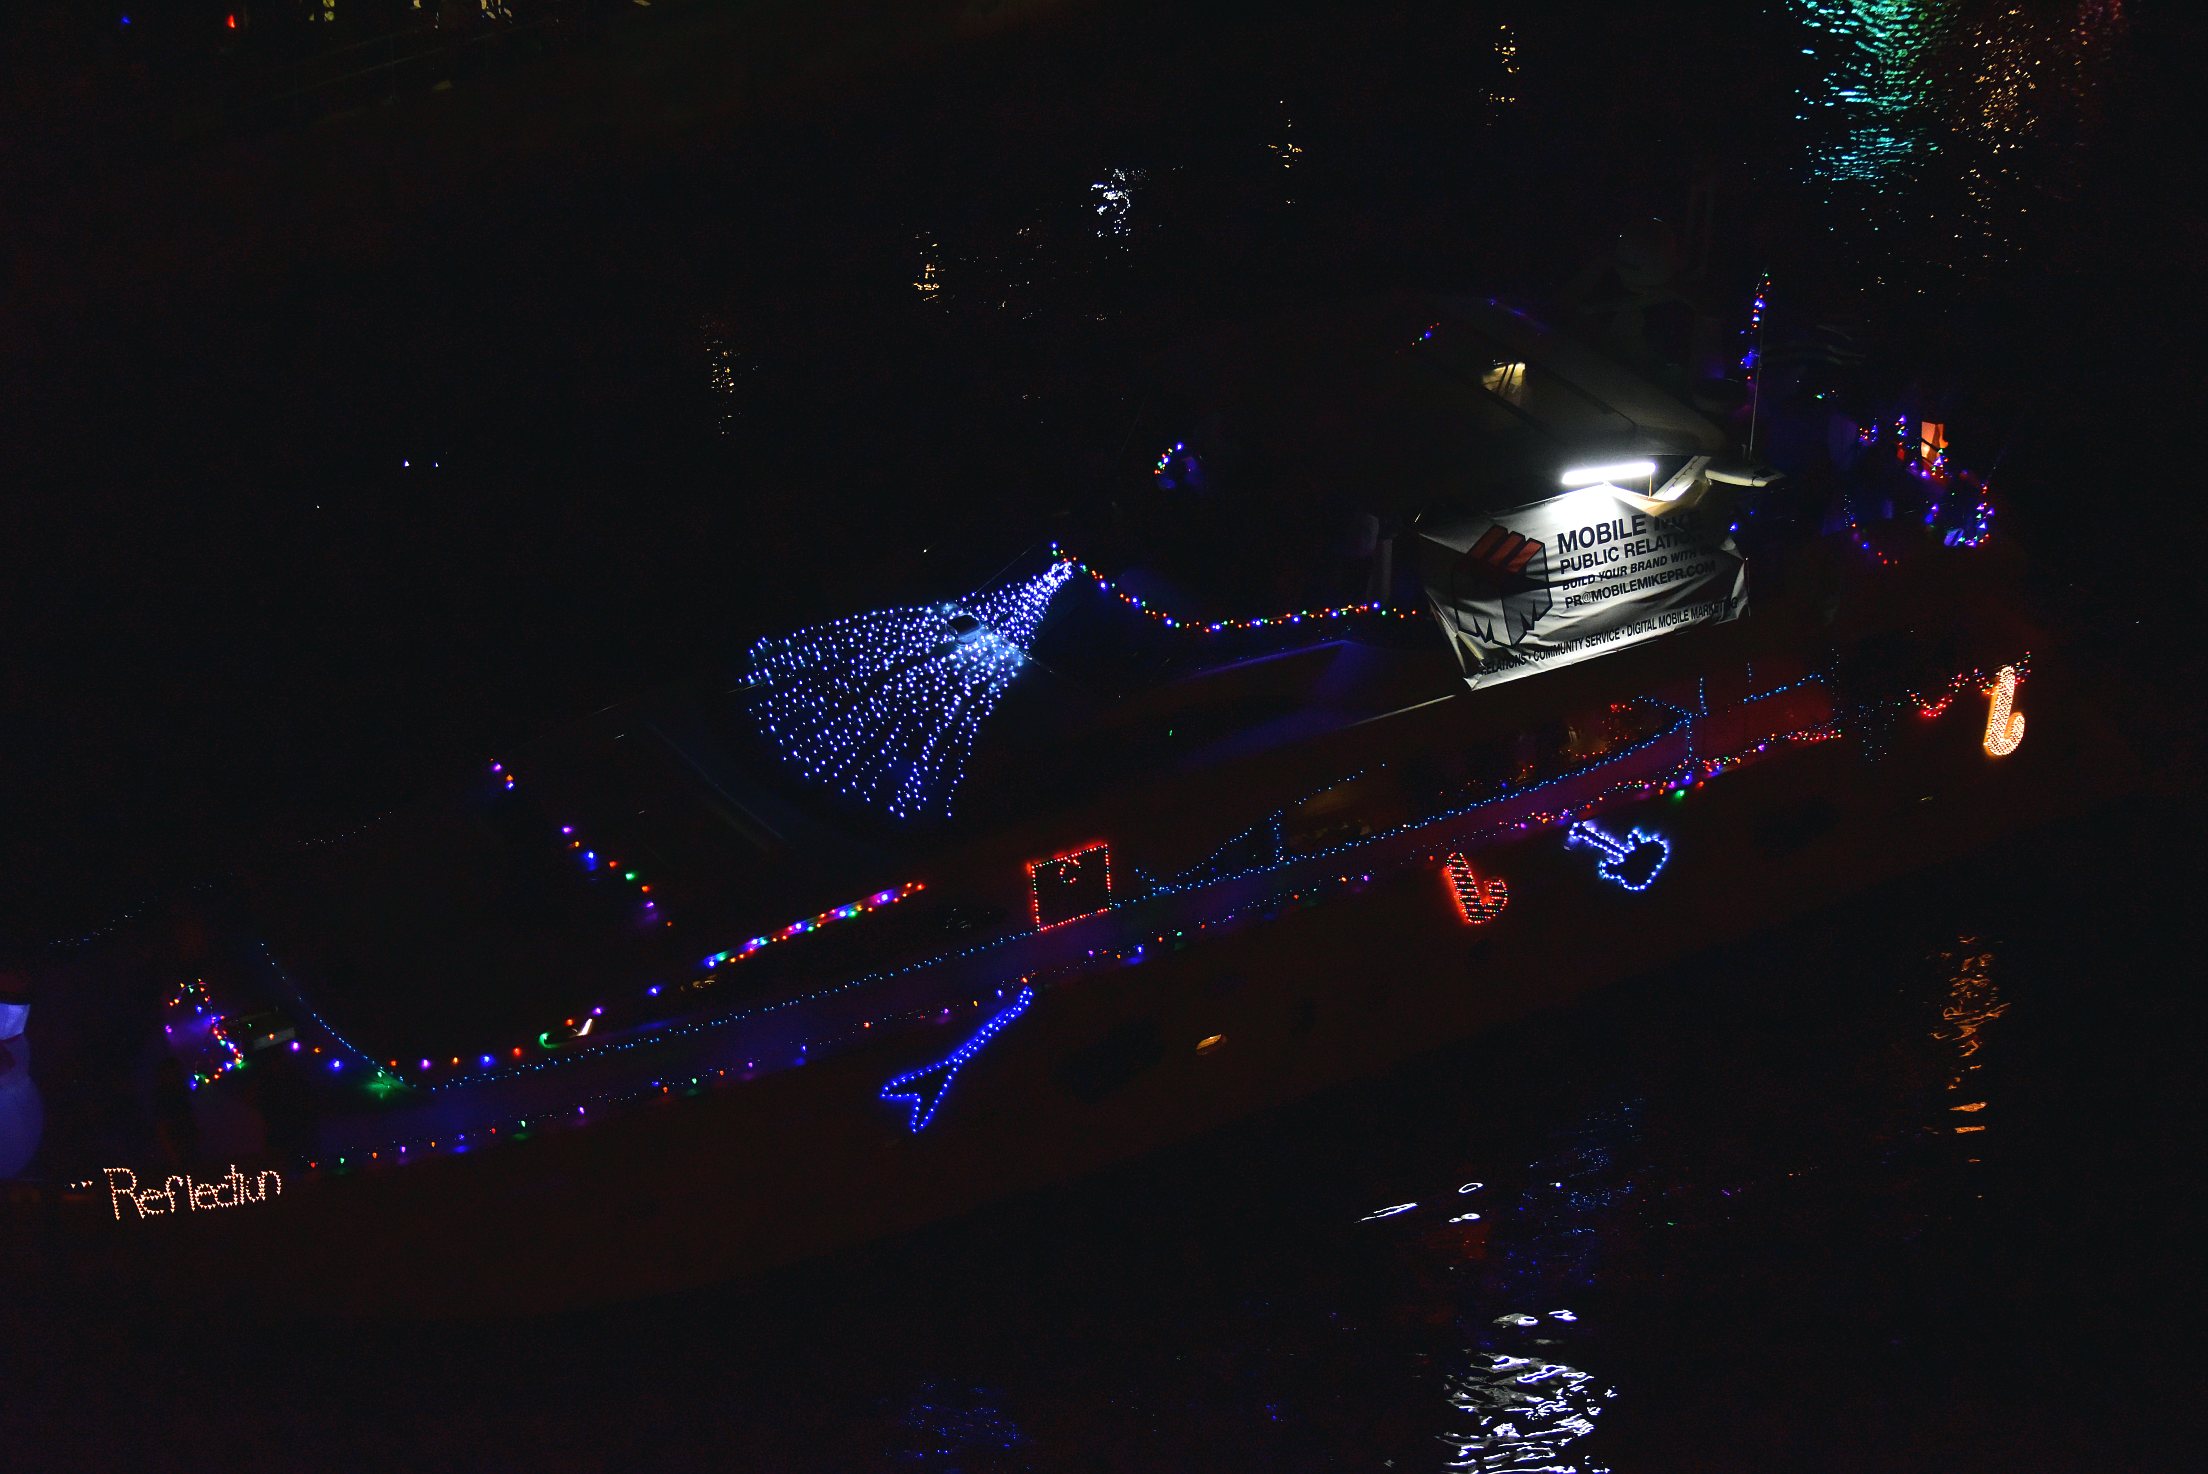 Mobile Mike on board Reflection, boat number 9 in the 2021 Winterfest Boat Parade